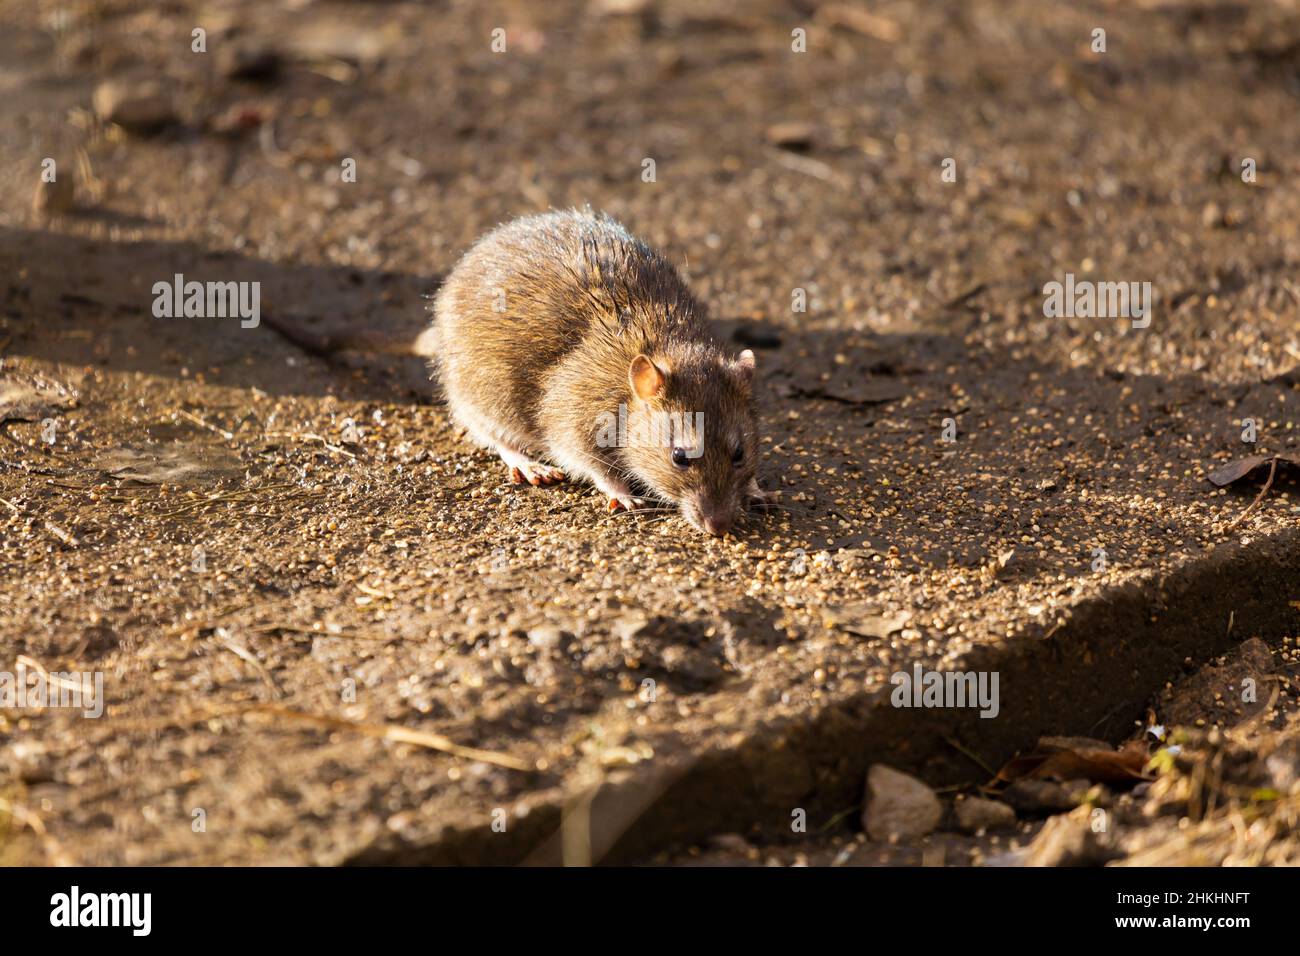 Common brown rat, rattus norvegicus, eating bird seed dropped from a tree feeder. Stock Photo